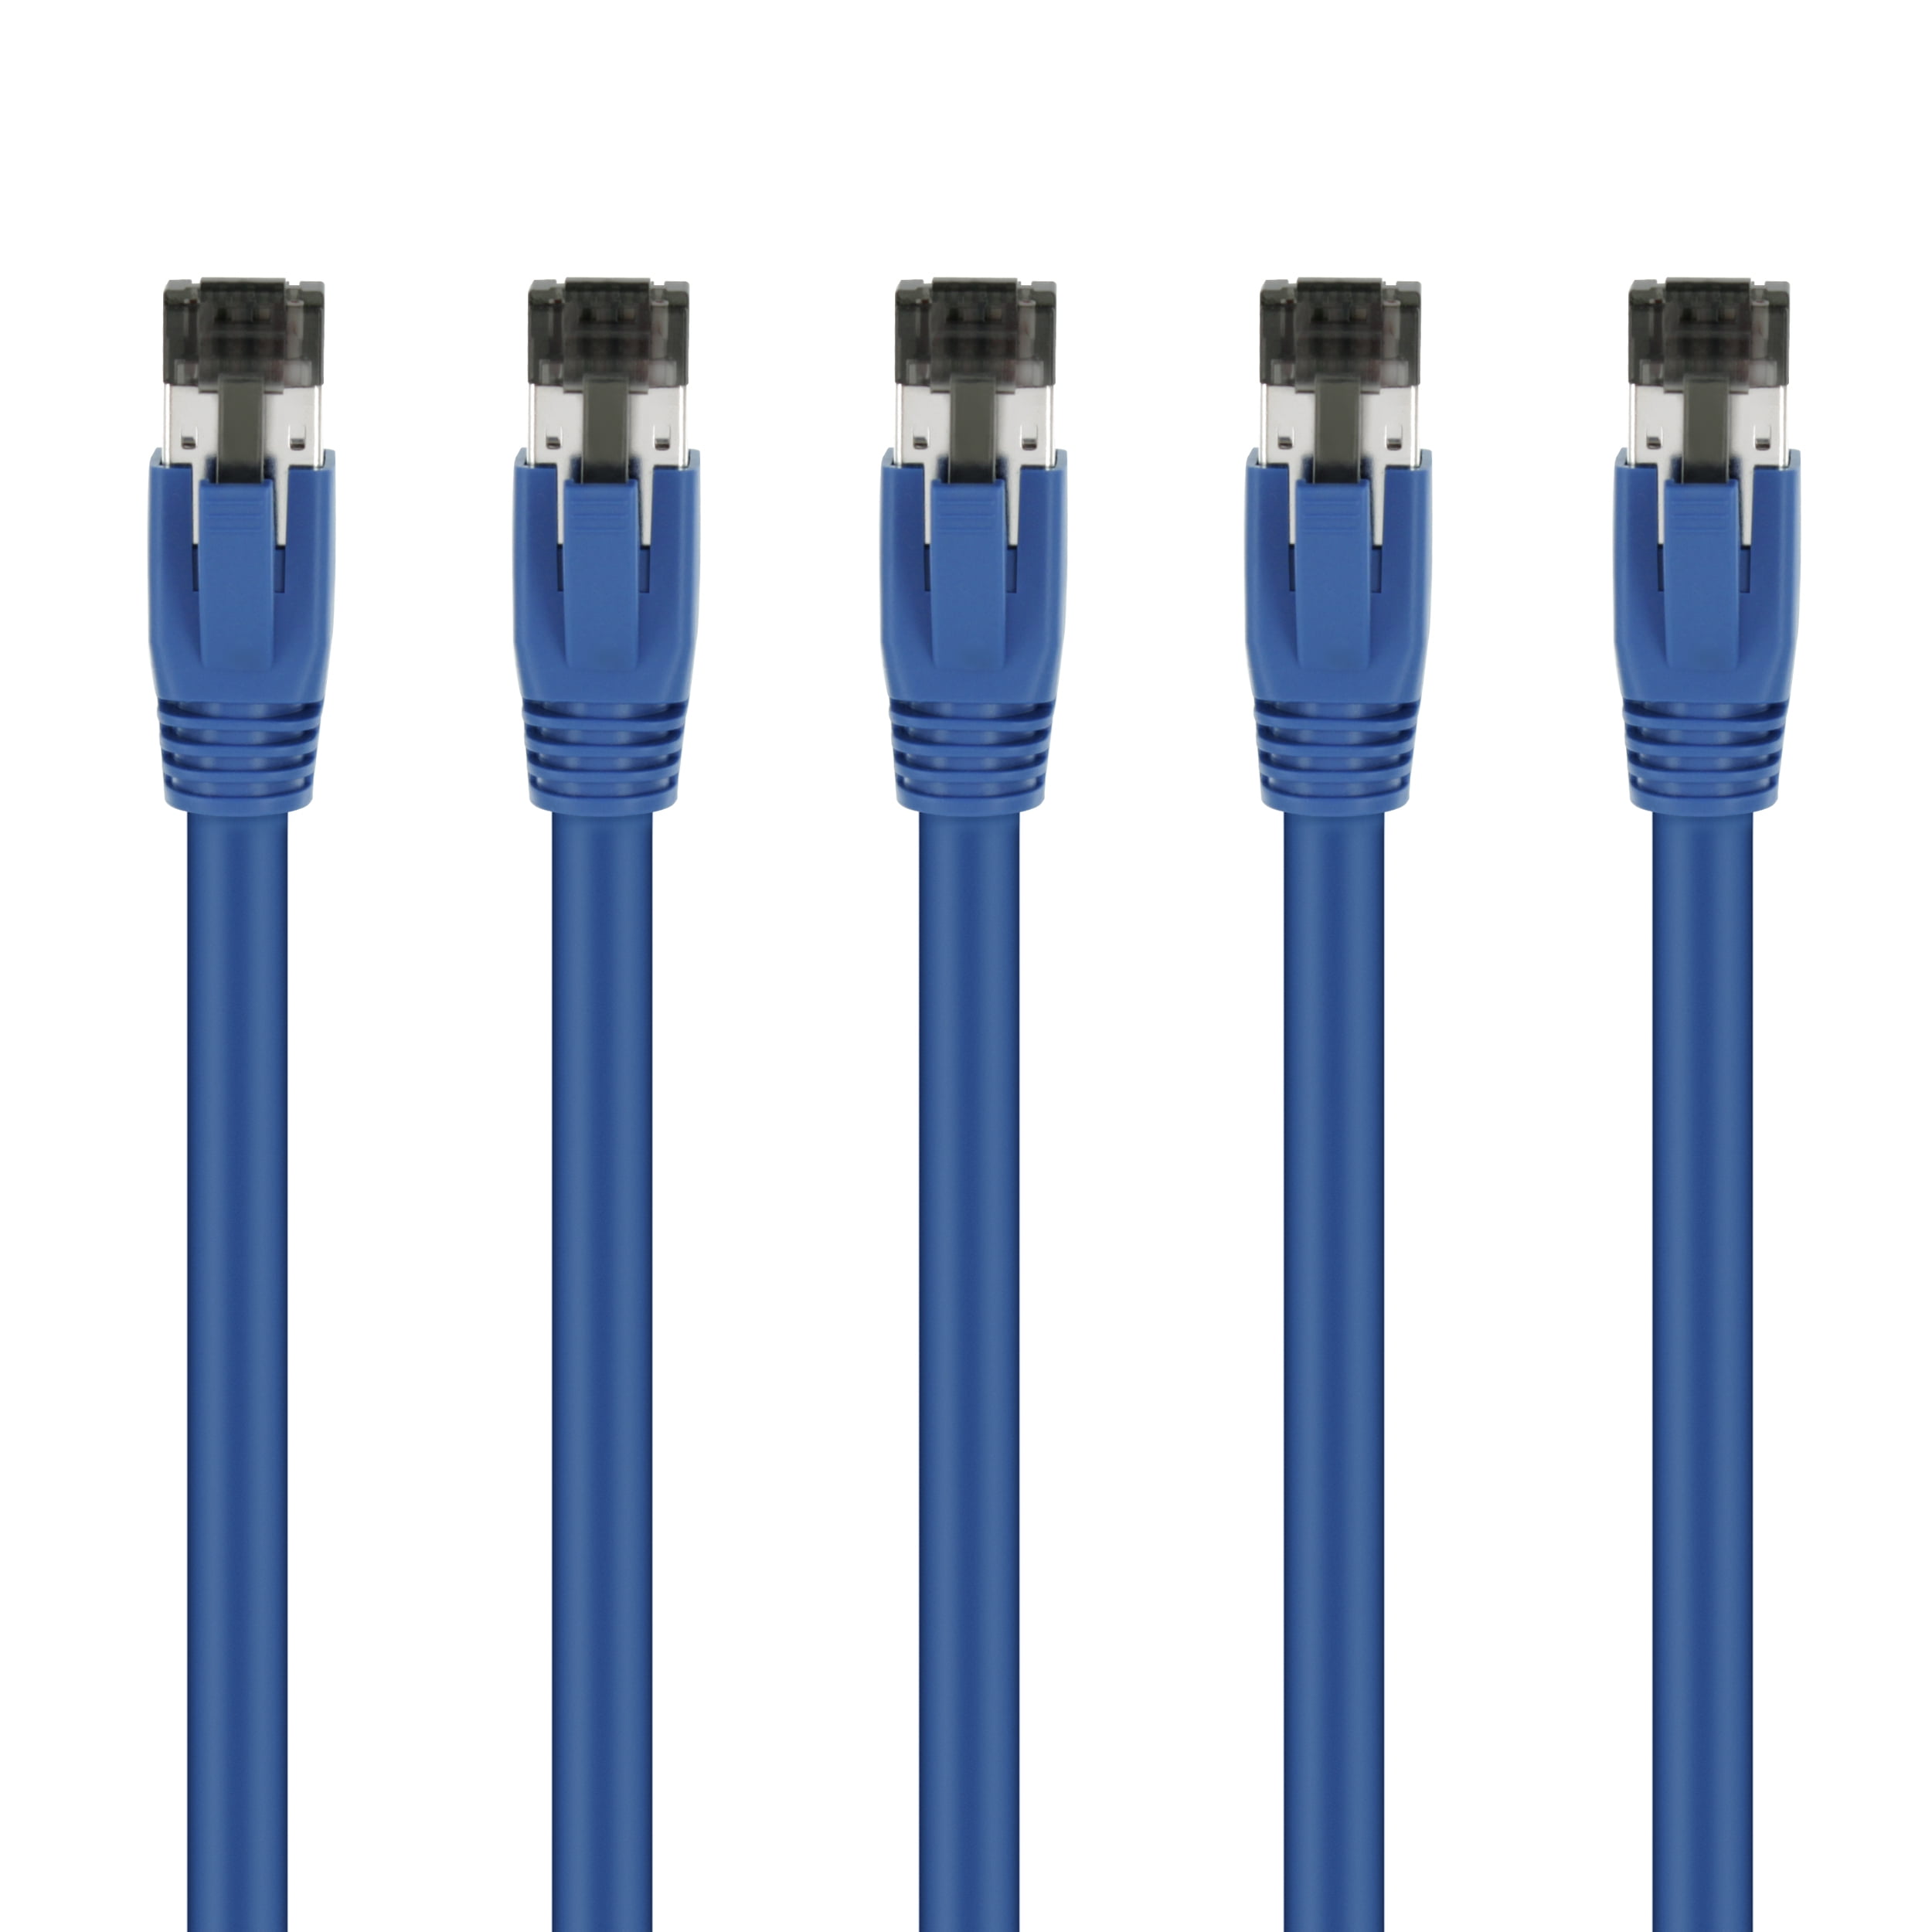 0.5ft / 5 Pack/Blue GearIT Cat8 Ethernet Cable S/FTP 24AWG Patch Cable 10Gbps/25Gbps/40Gpbs 2GHz 2000Mhz Cat 8 Category8 Compatible with Data Center/Enterprise/Smart Home Network 